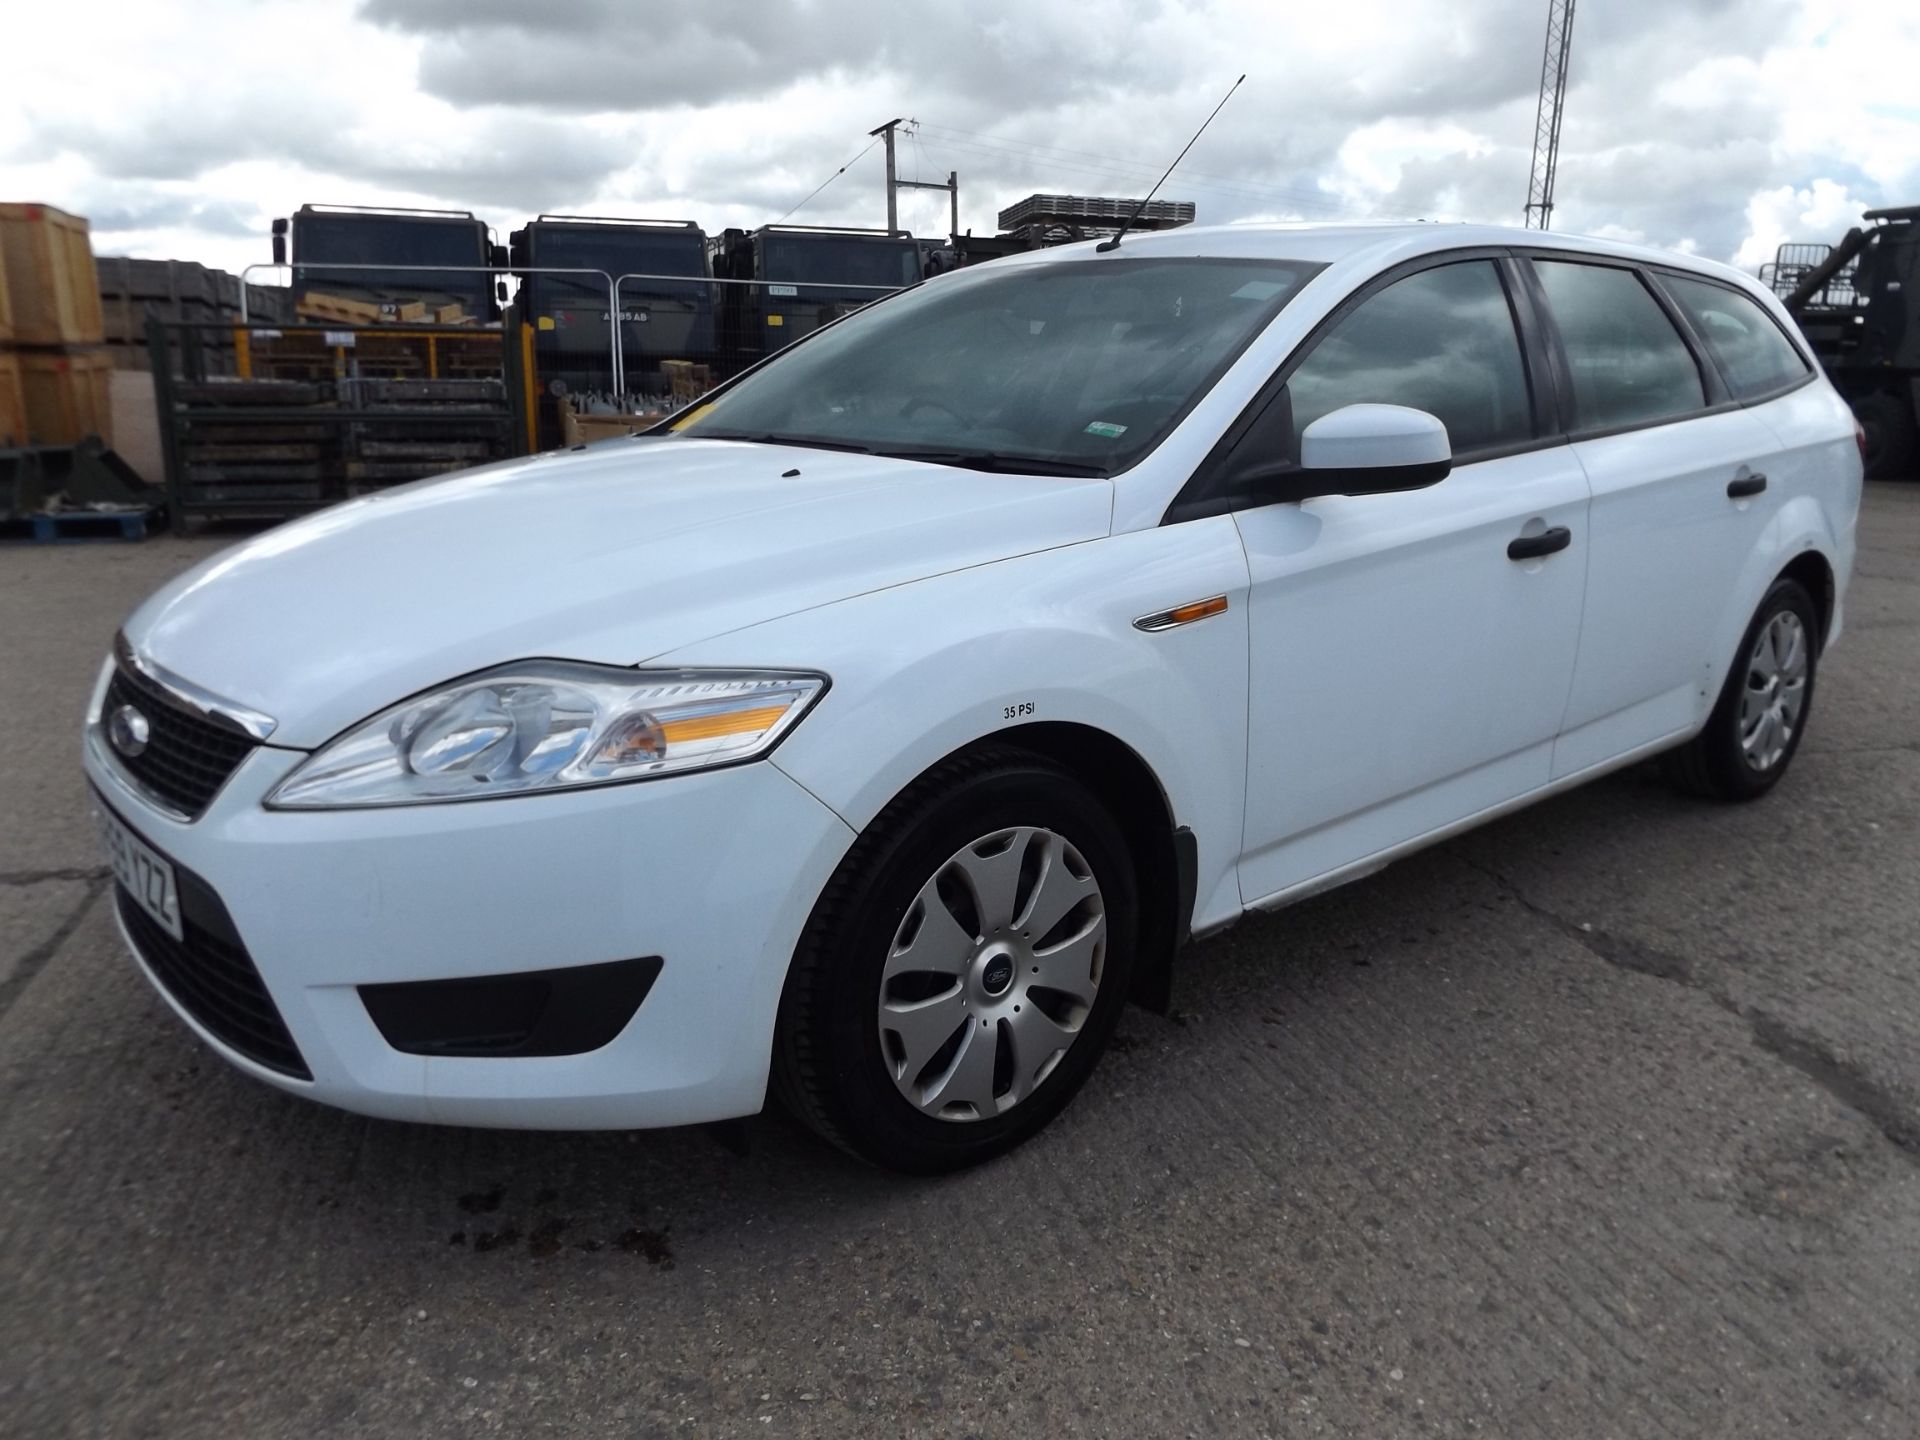 Ford Mondeo 2.0TDCi Estate - Image 3 of 19